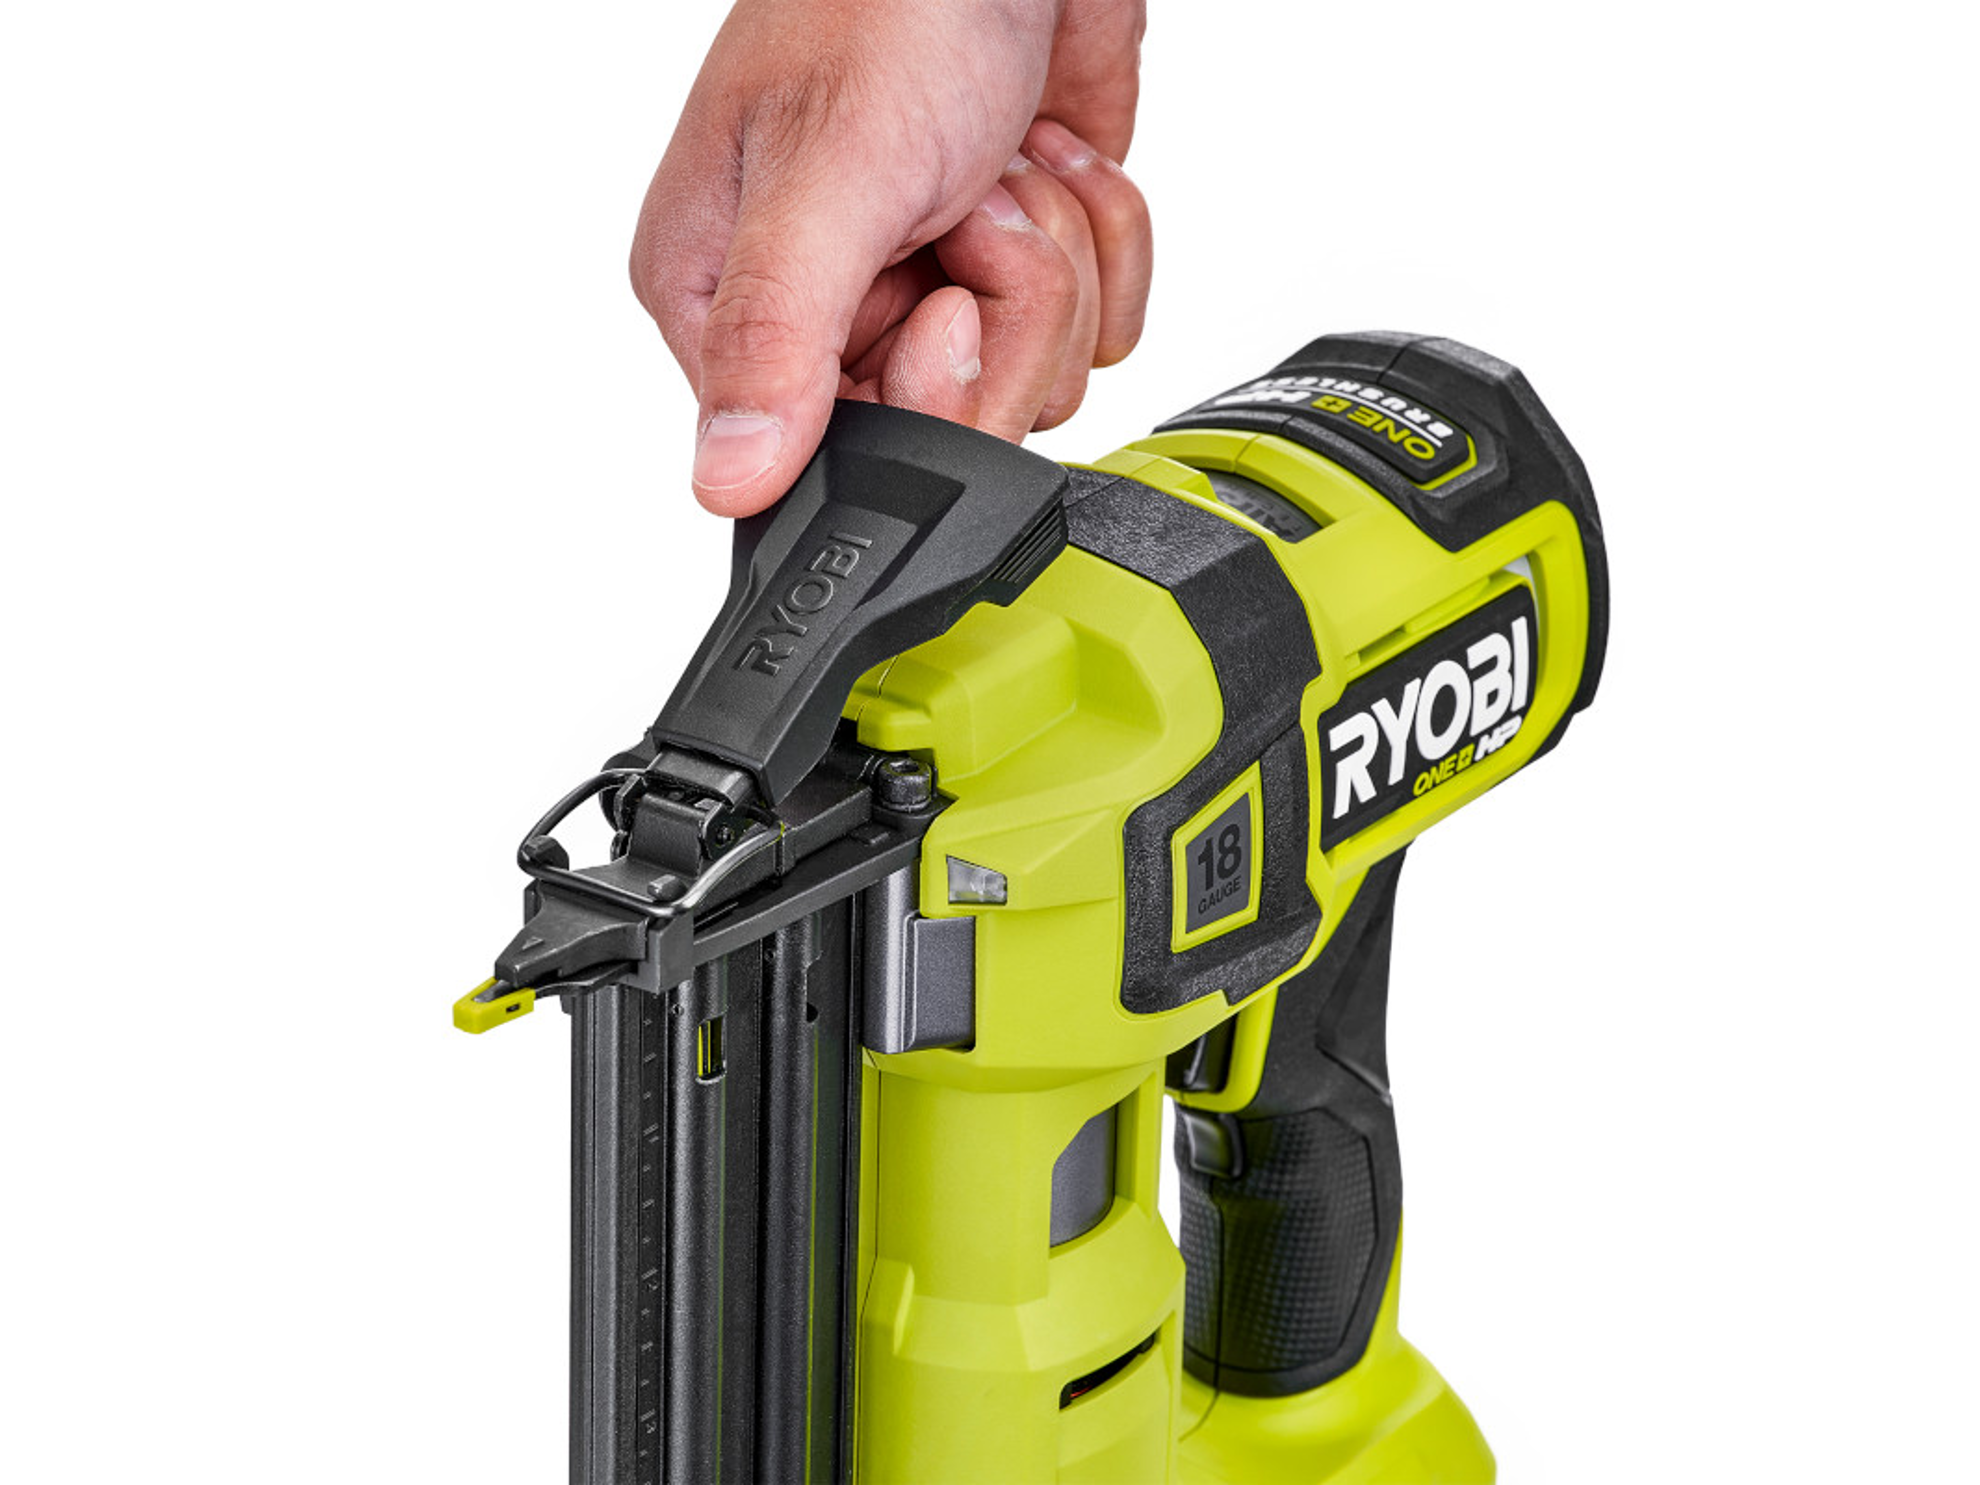 Product Features Image for 18V ONE+ HP BRUSHLESS AIRSTRIKE 18GA BRAD NAILER KIT.